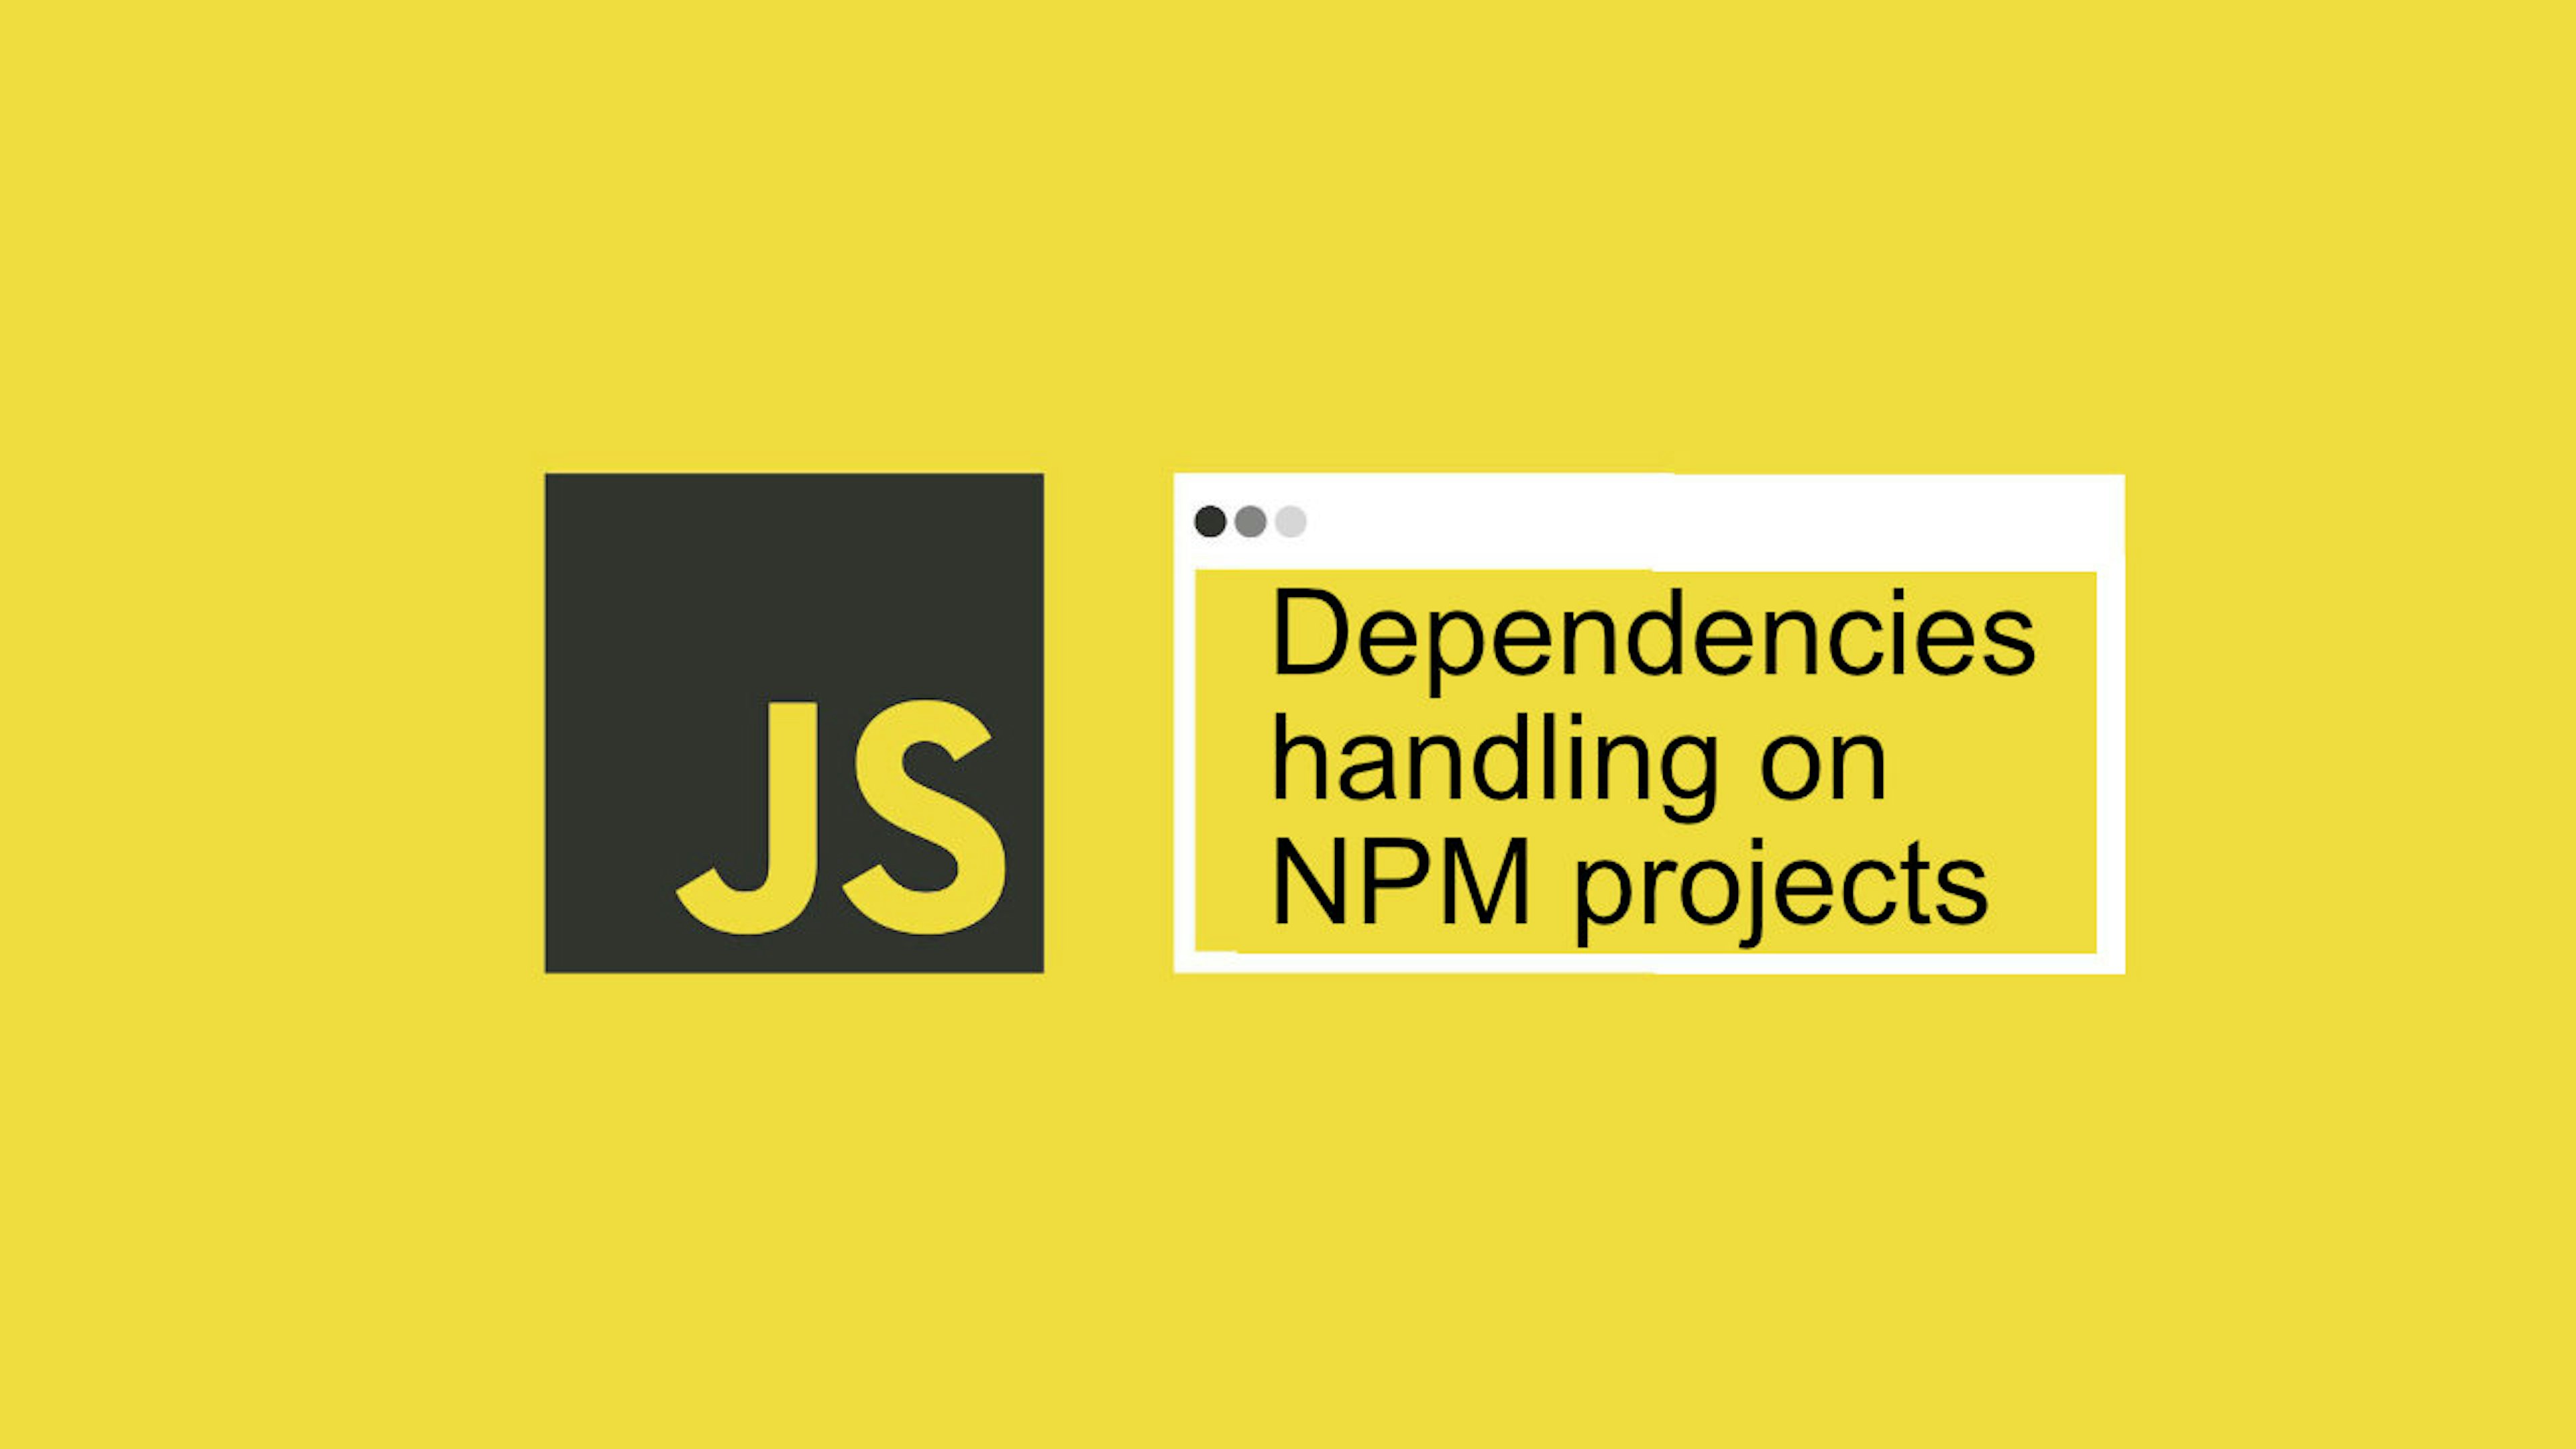 Dependencies handling on NPM projects